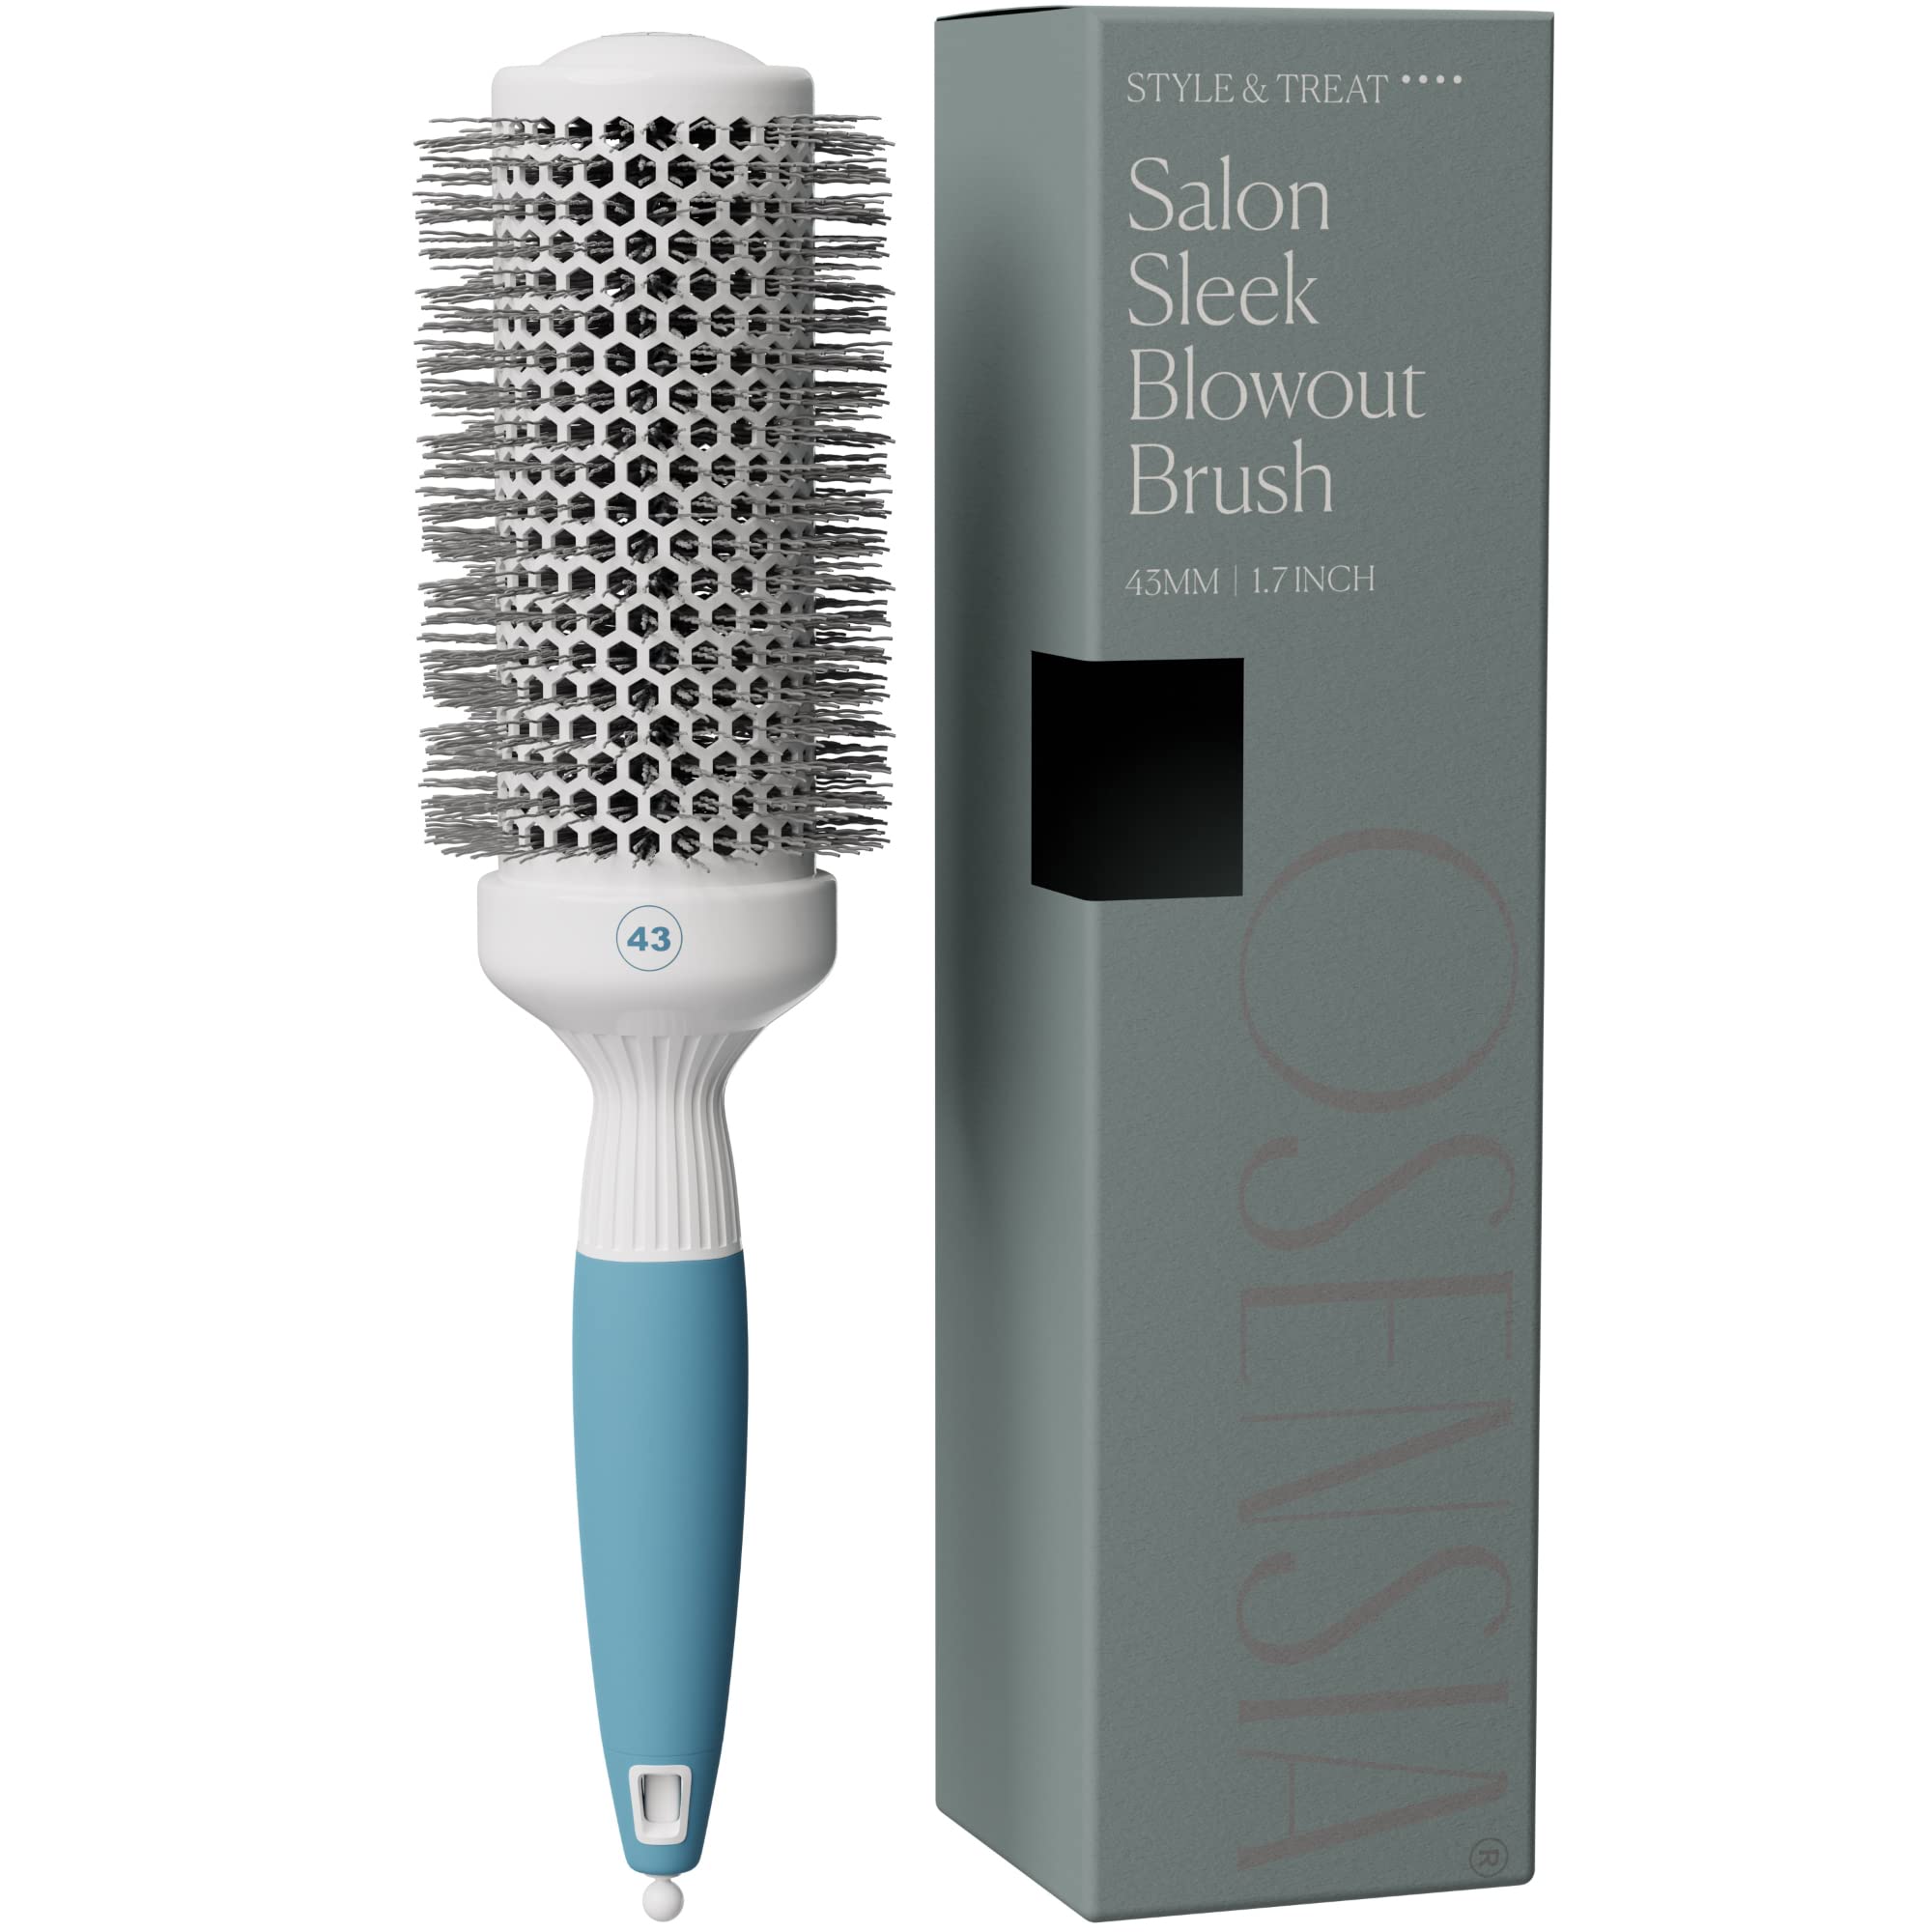 Osensia Round Brush for Blow Drying - Medium Ceramic Ionic Thermal Barrel Brush for Sleek, Precise Heat Styling and Blowout Volume - Lig